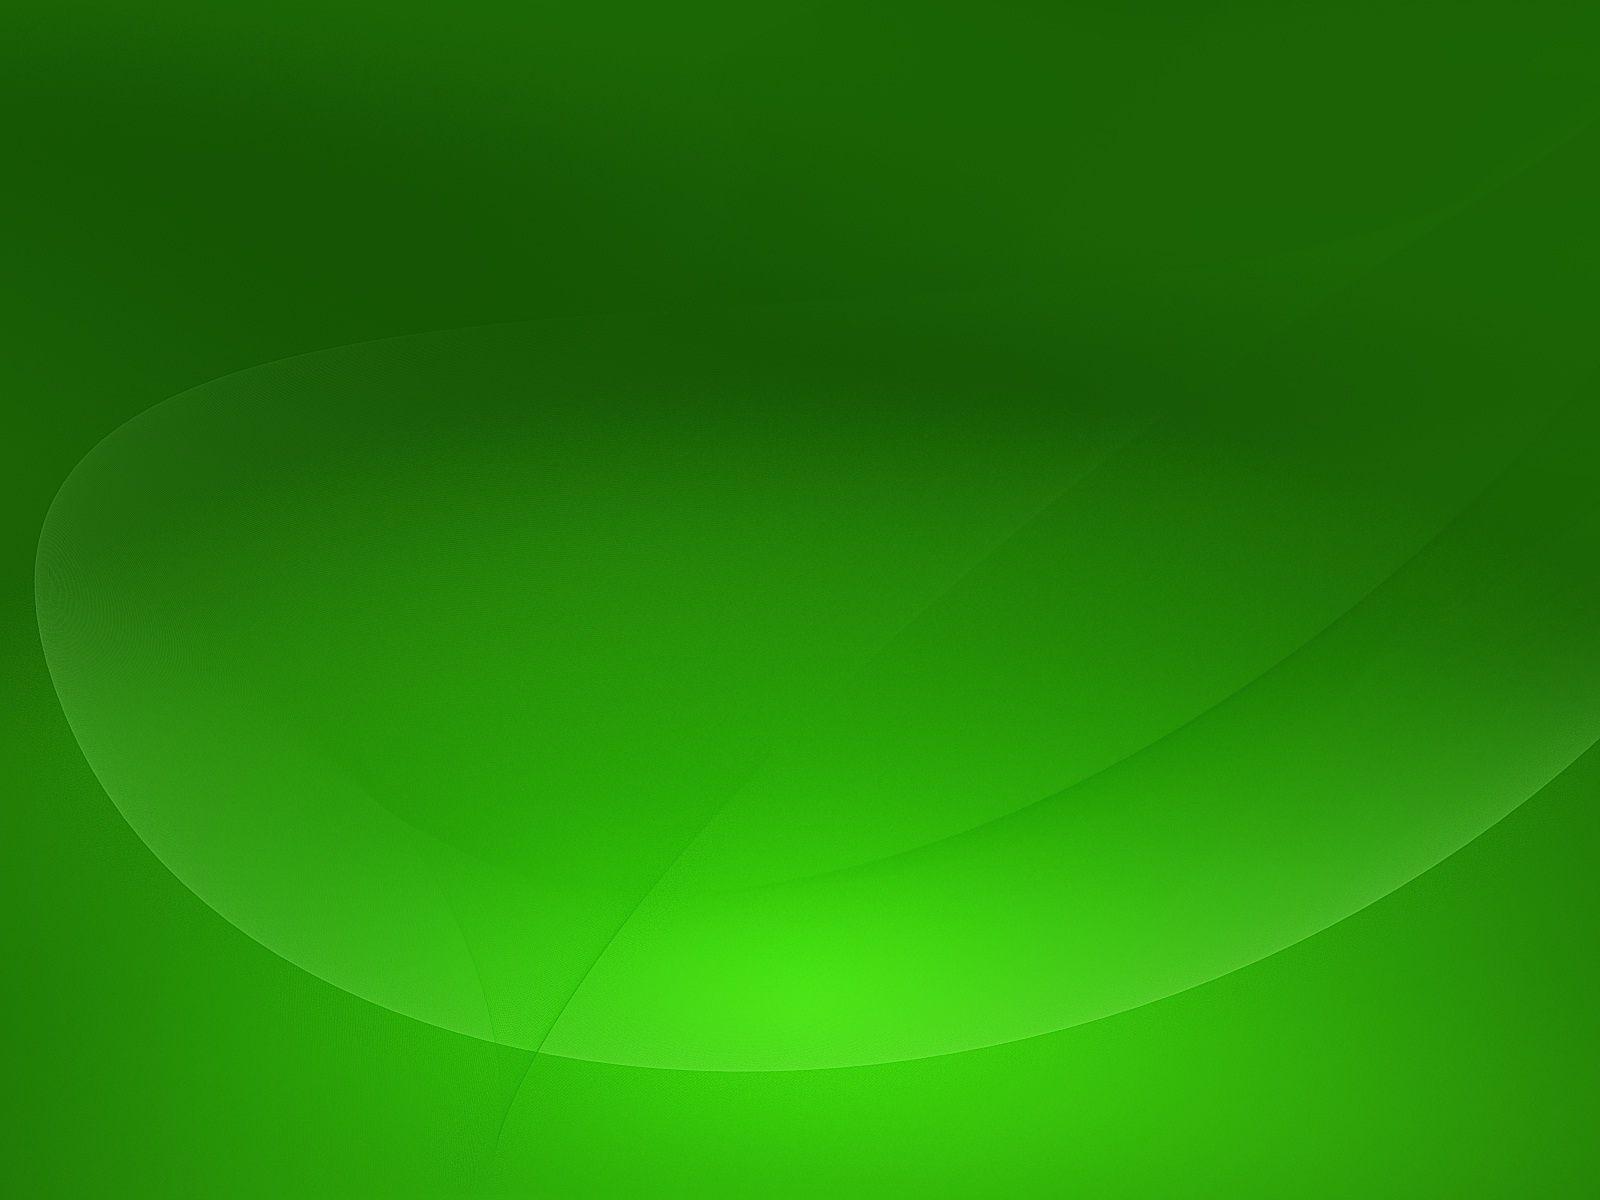 3D green wallpaper wallpaper for free download about 482